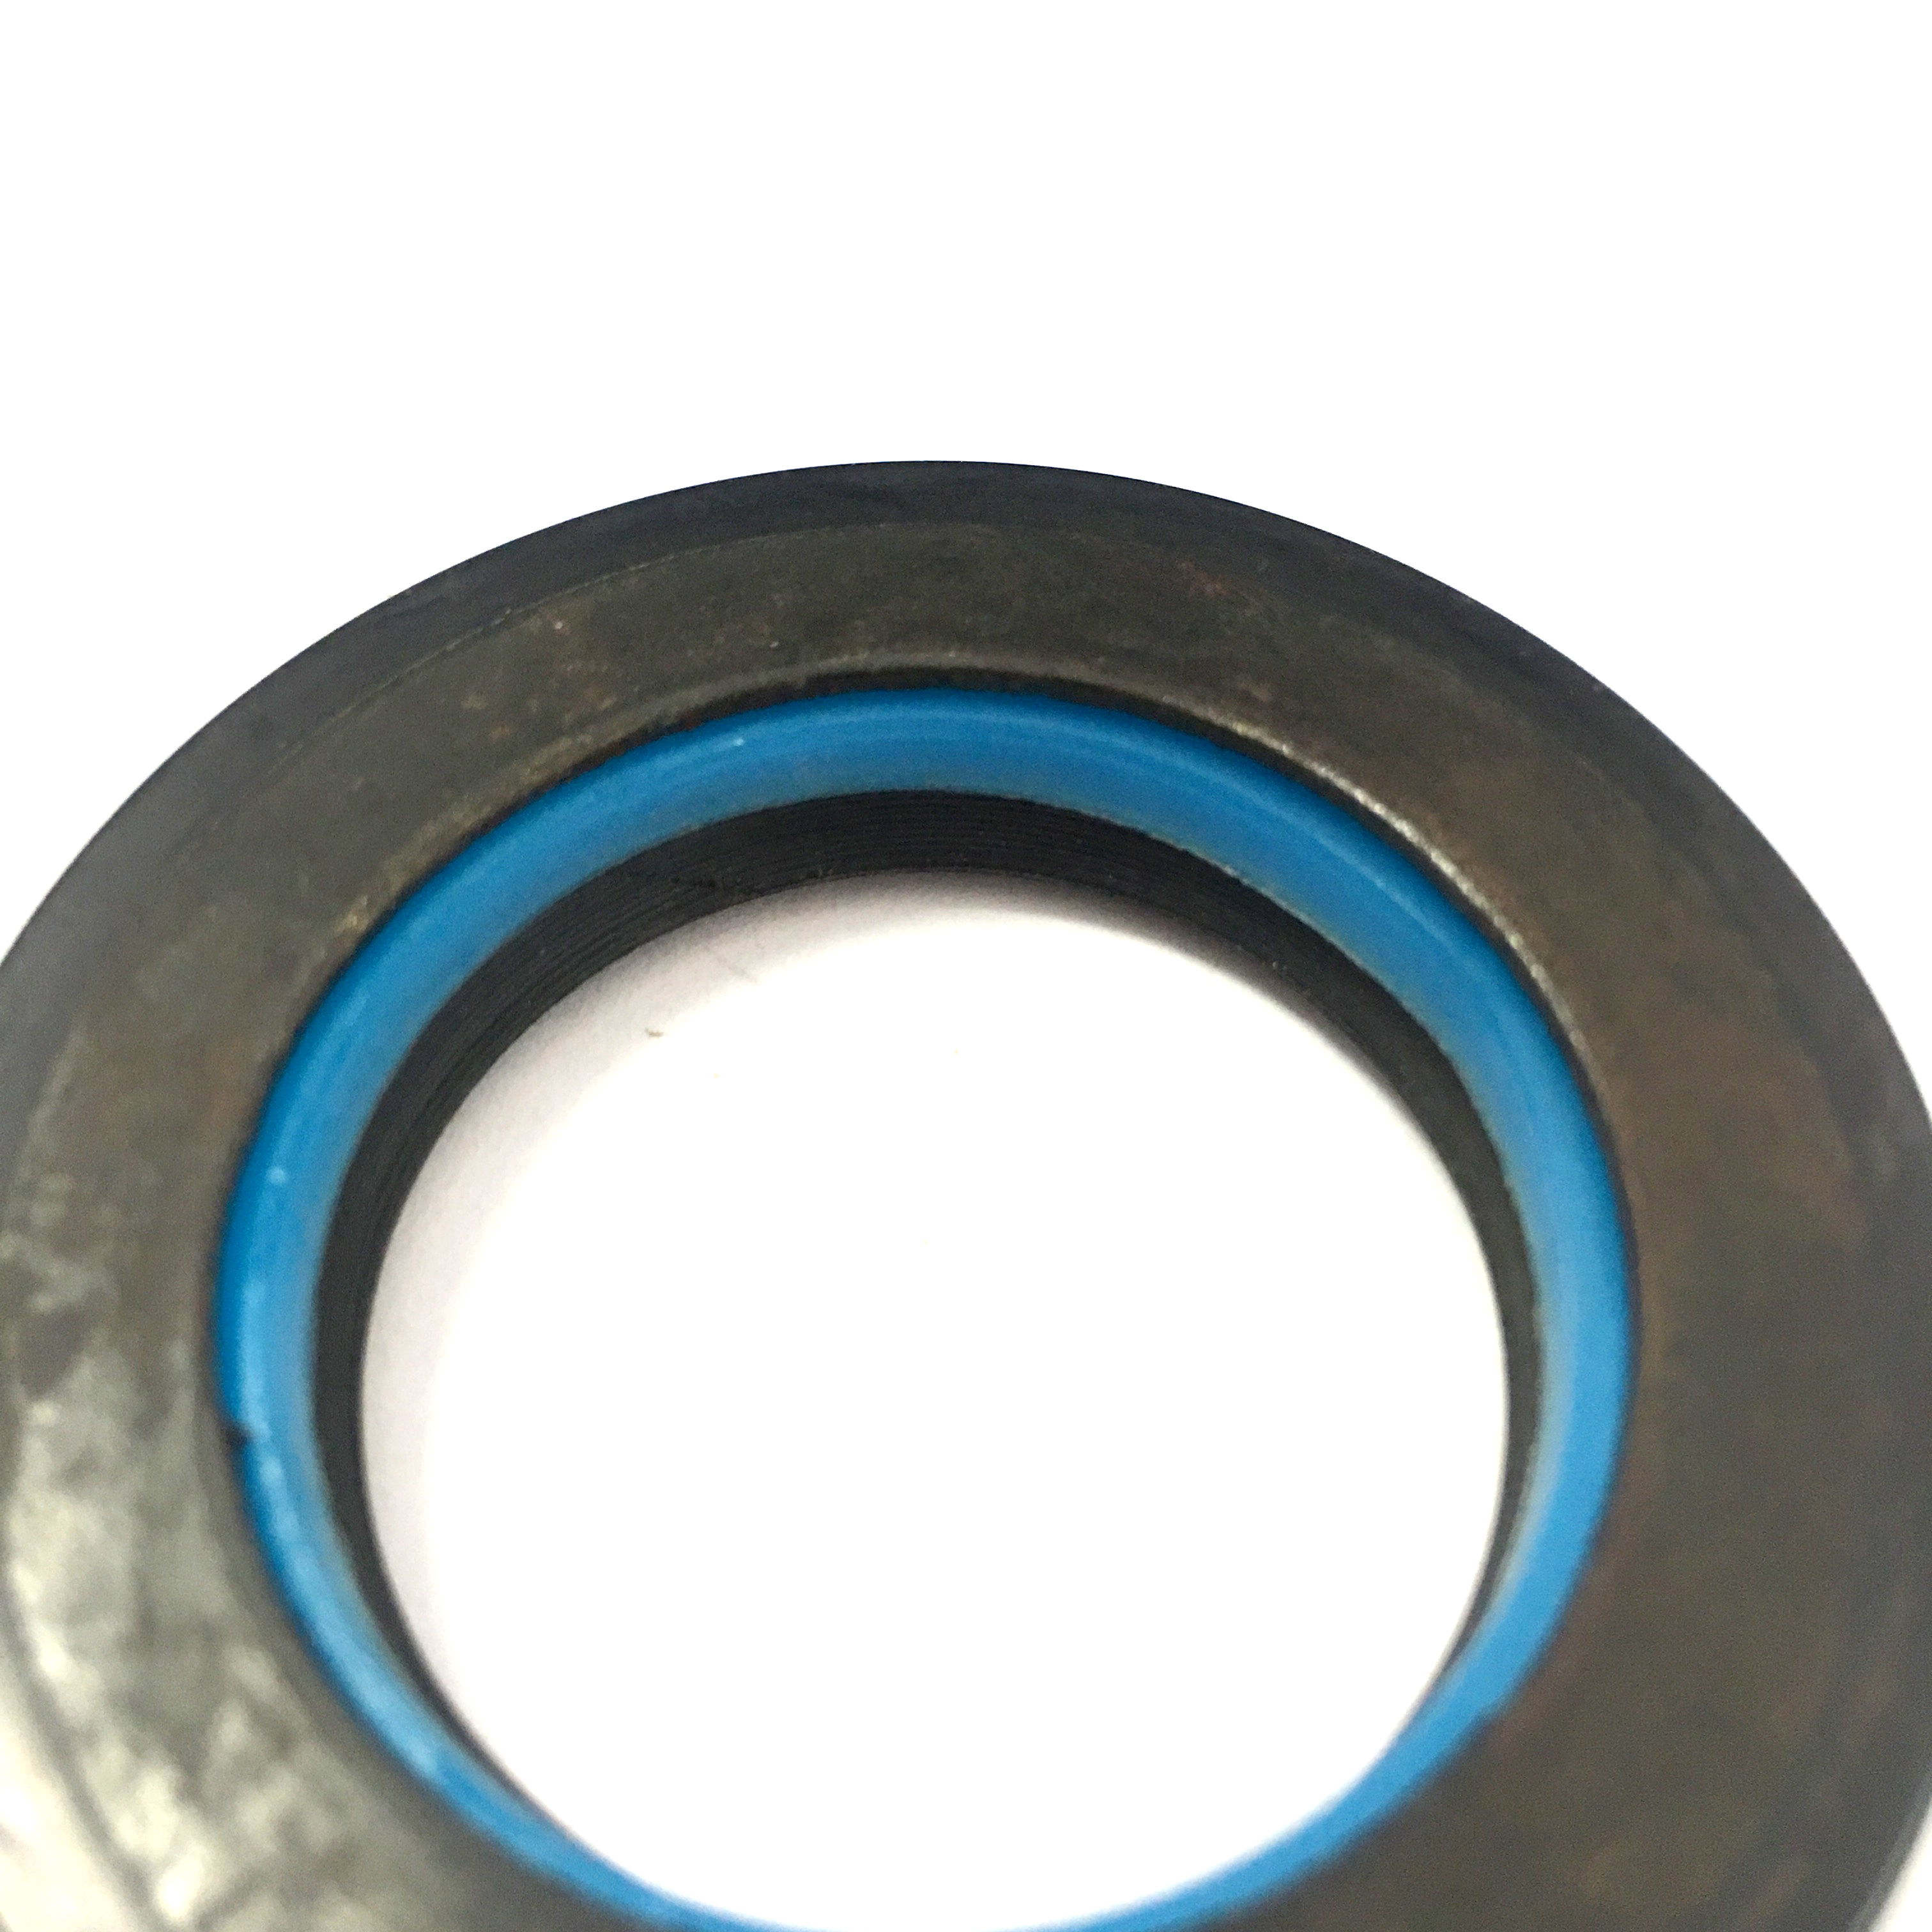 Auto Oil Seal Fit For Japanese Car 30*48*8.5